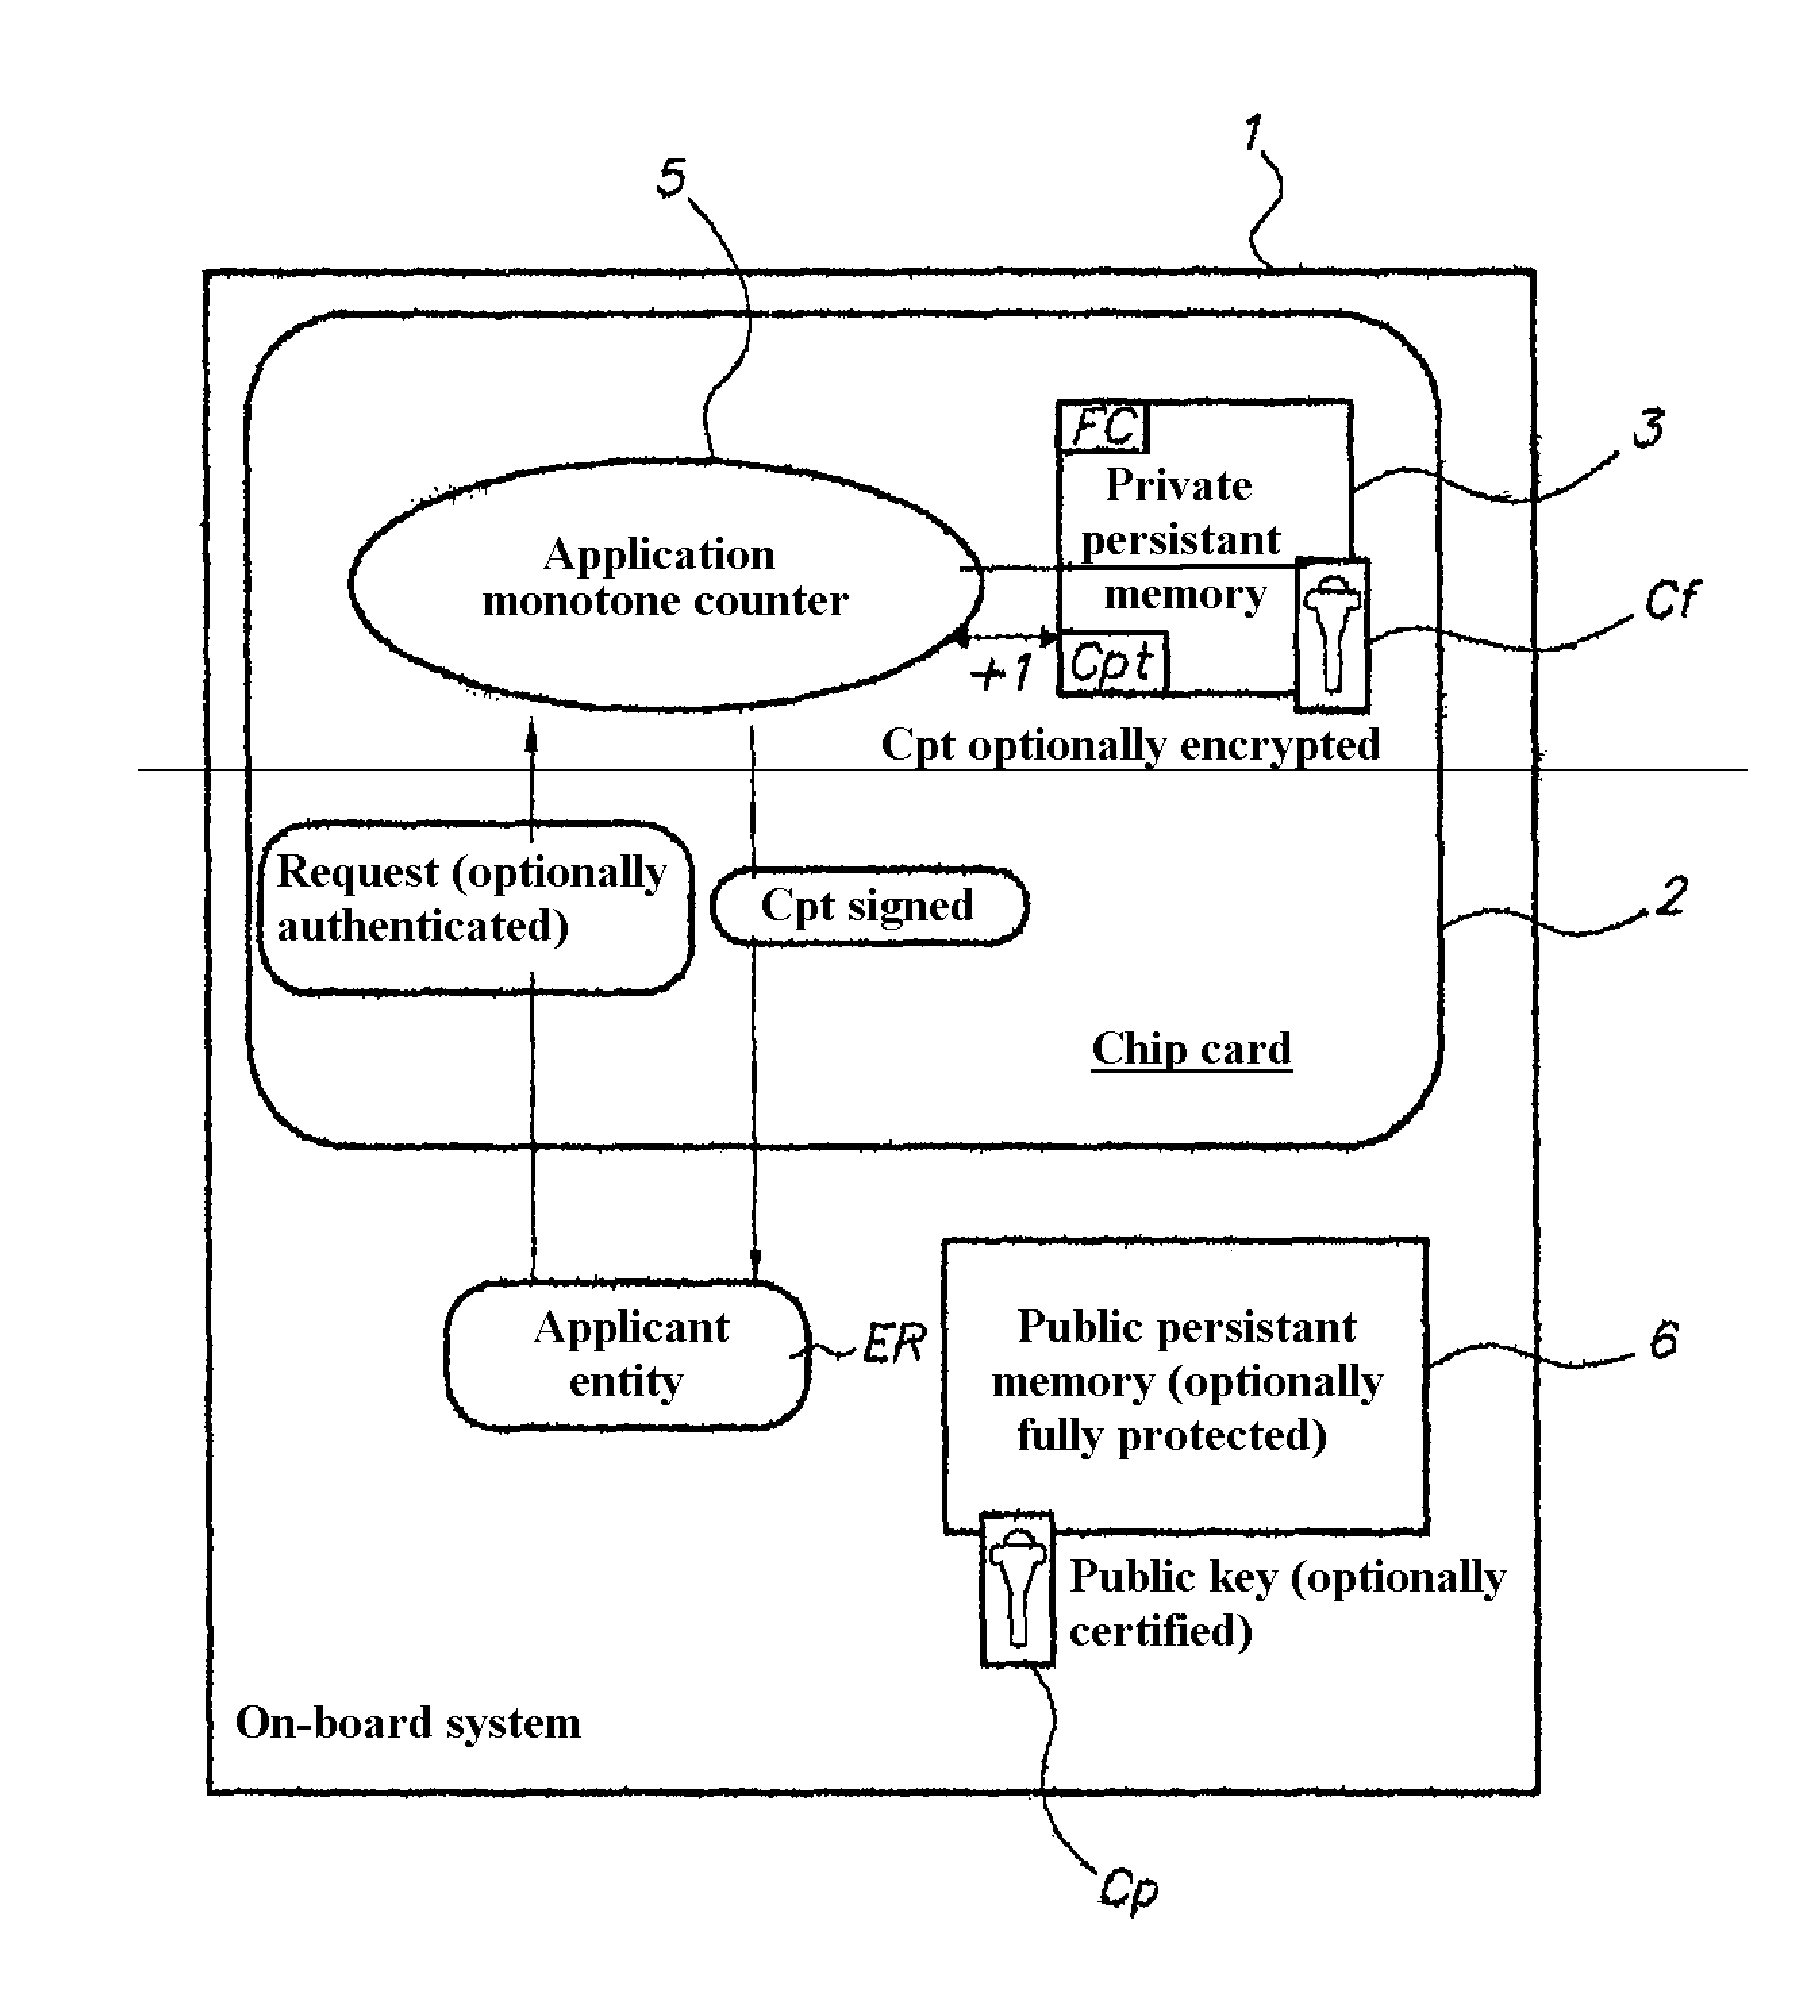 Method for creating a secure counter on an on-board computer system comprising a chip card